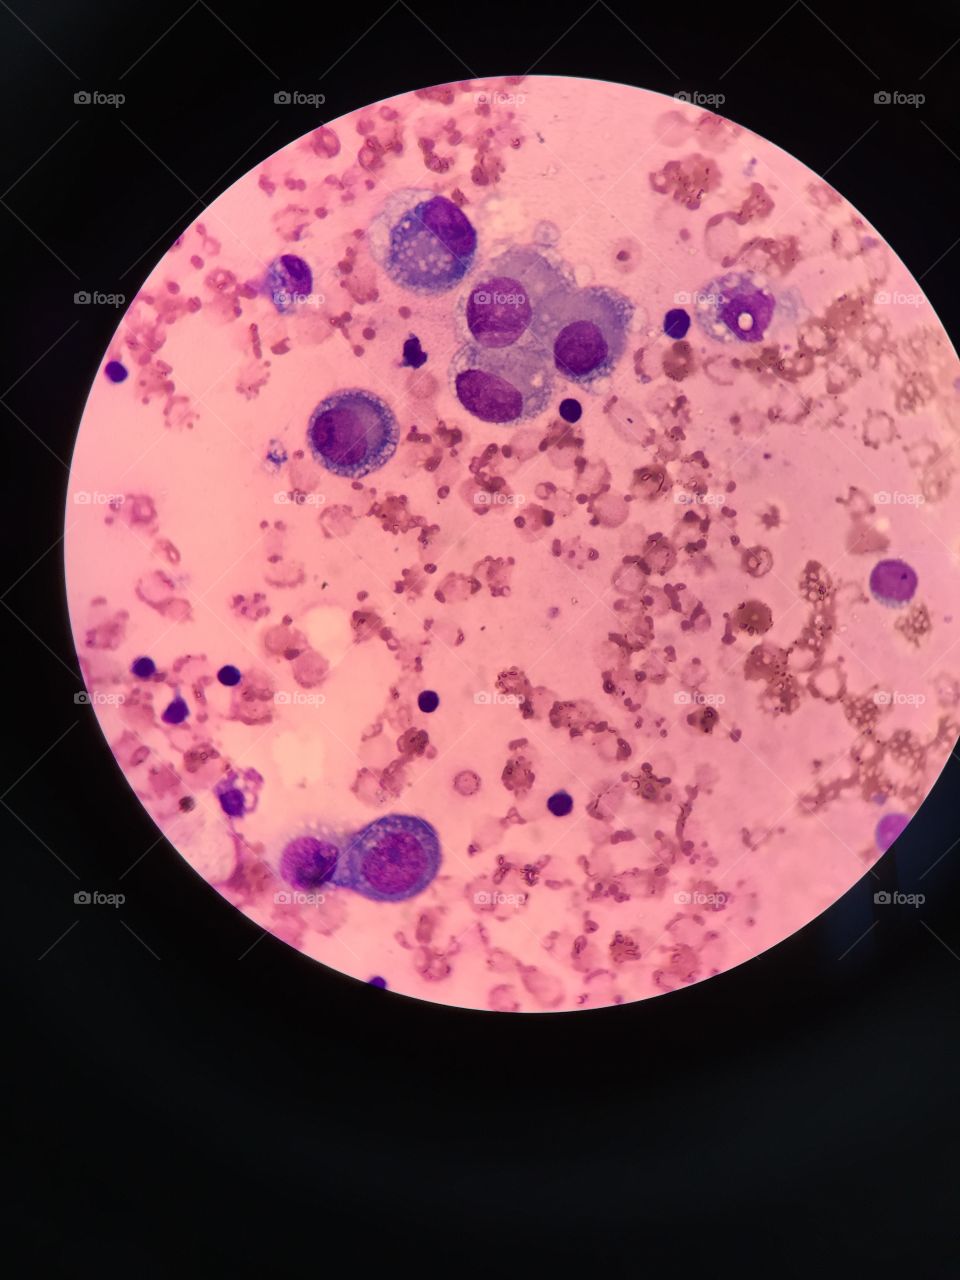 Mesothelial cell